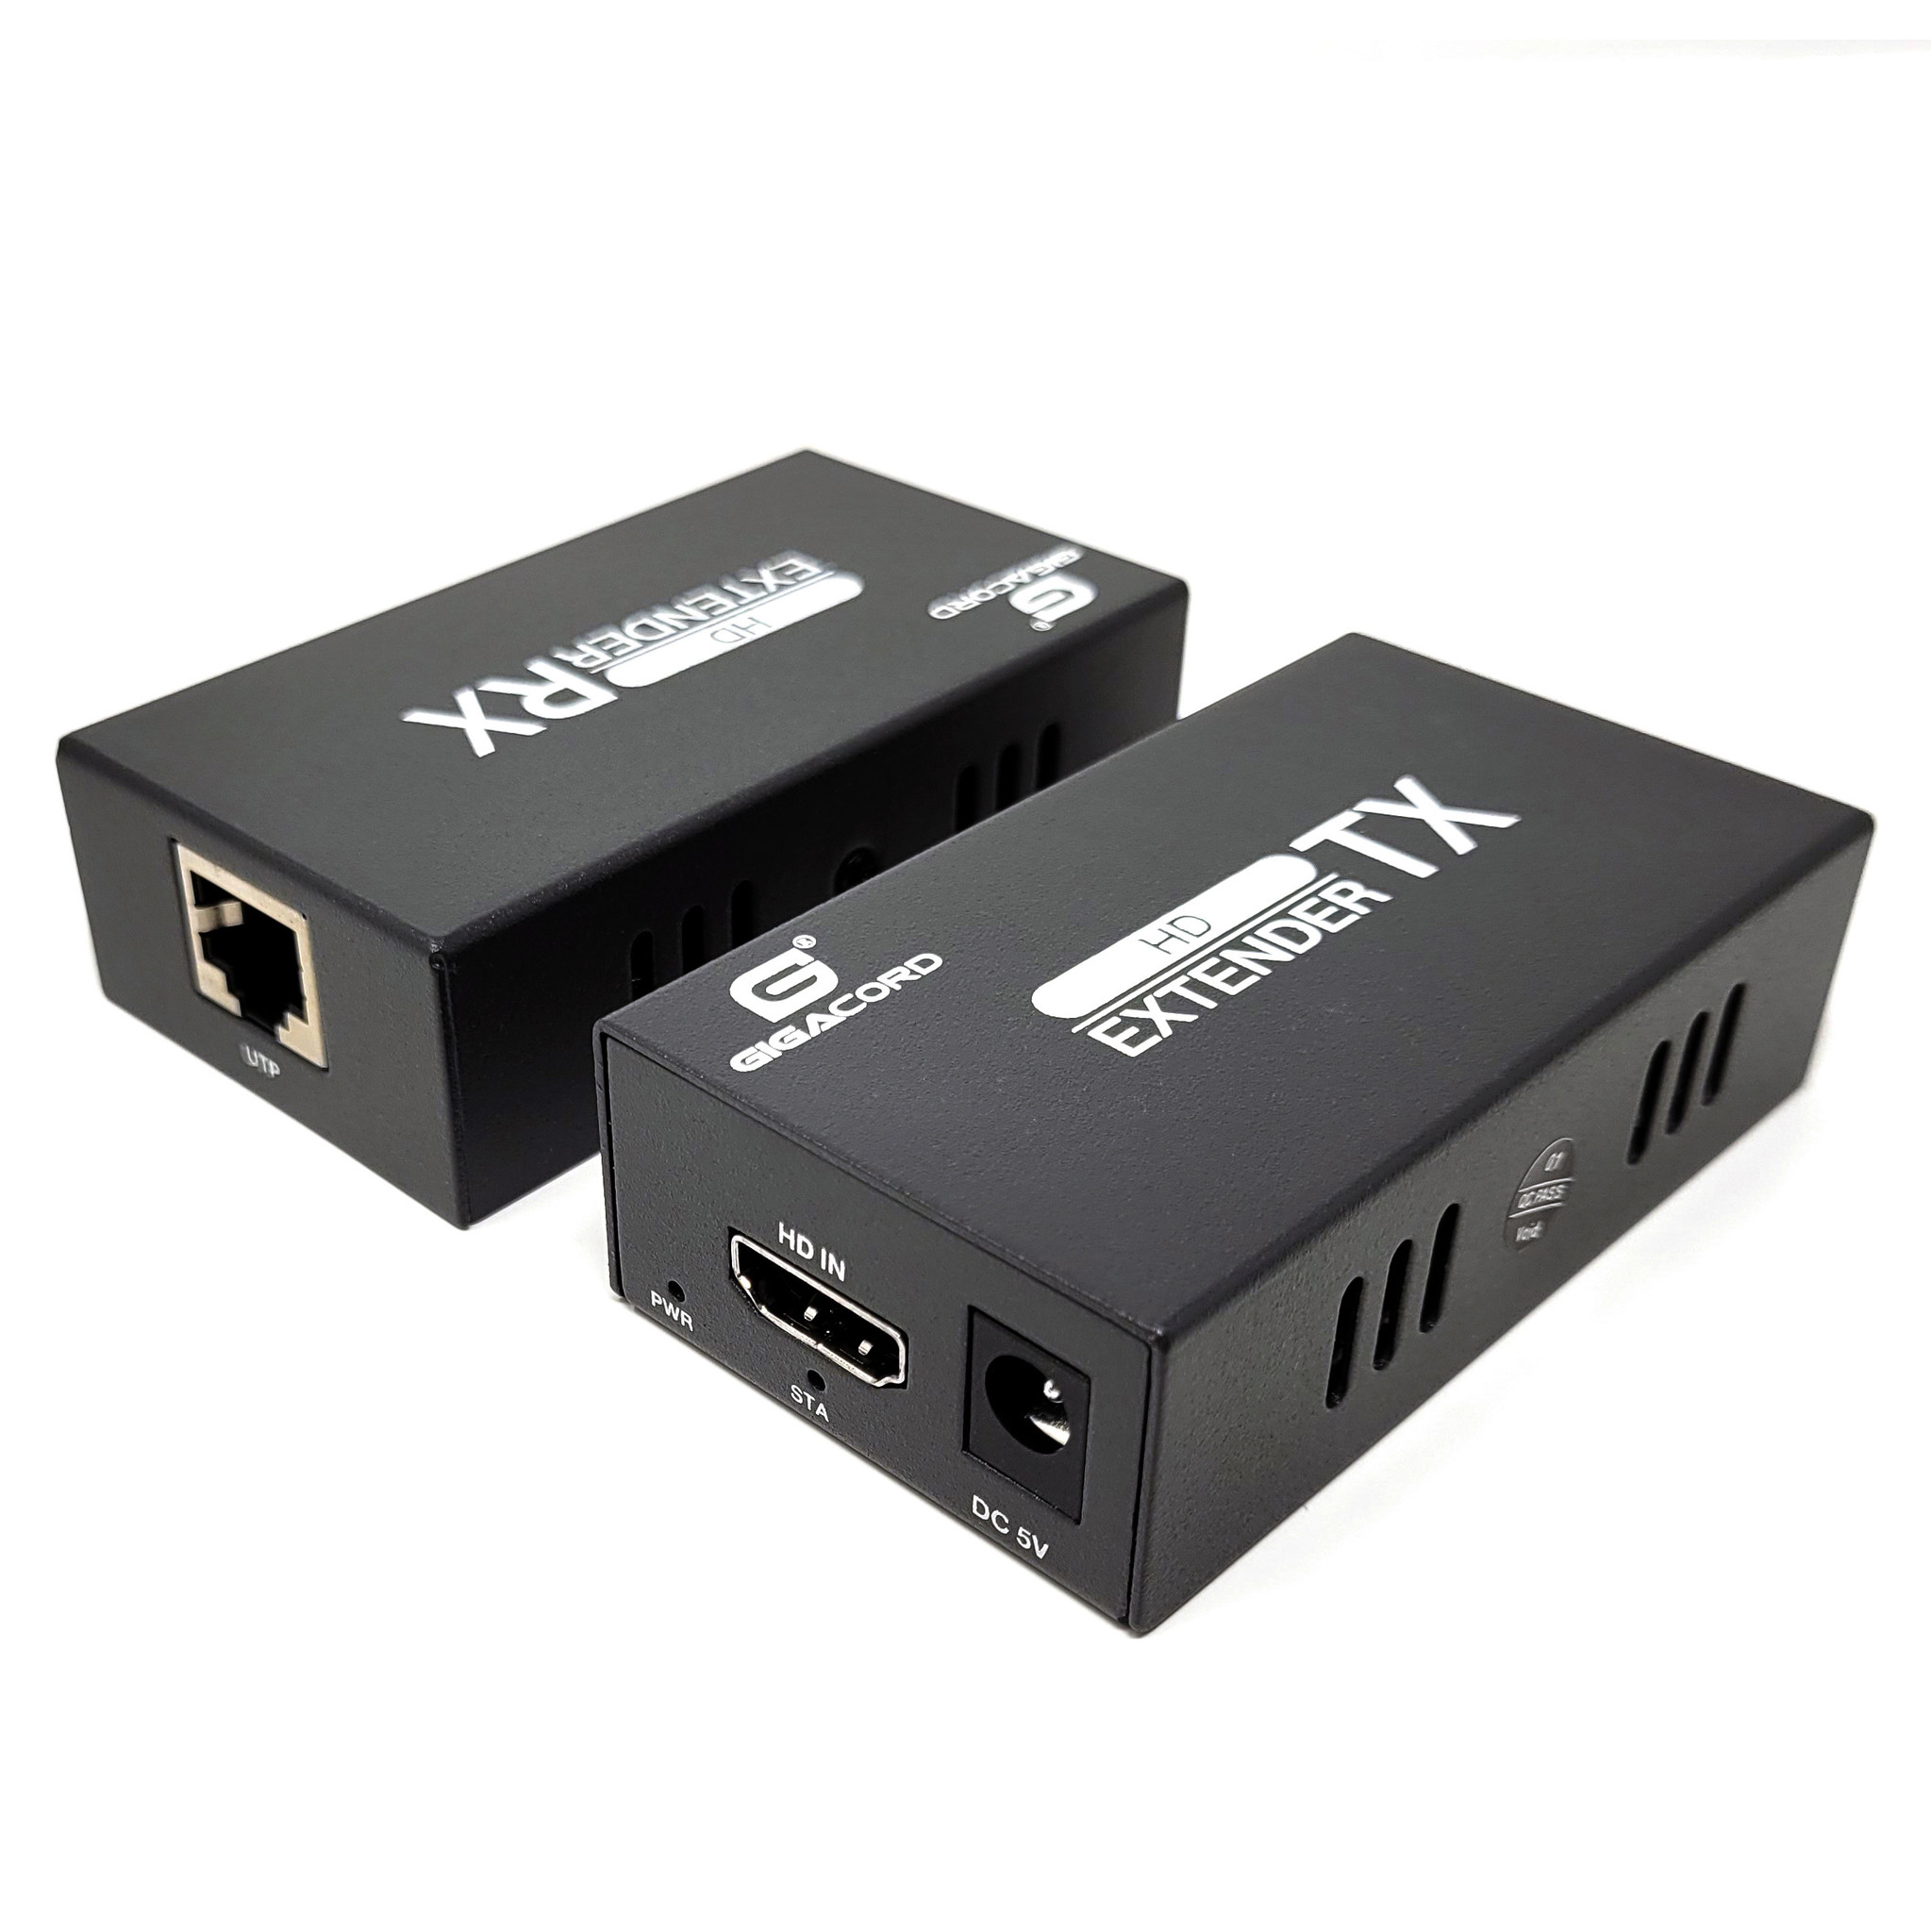 HDMI Extender 1080p Over Cat 6 Cable 50m / 164 ft.